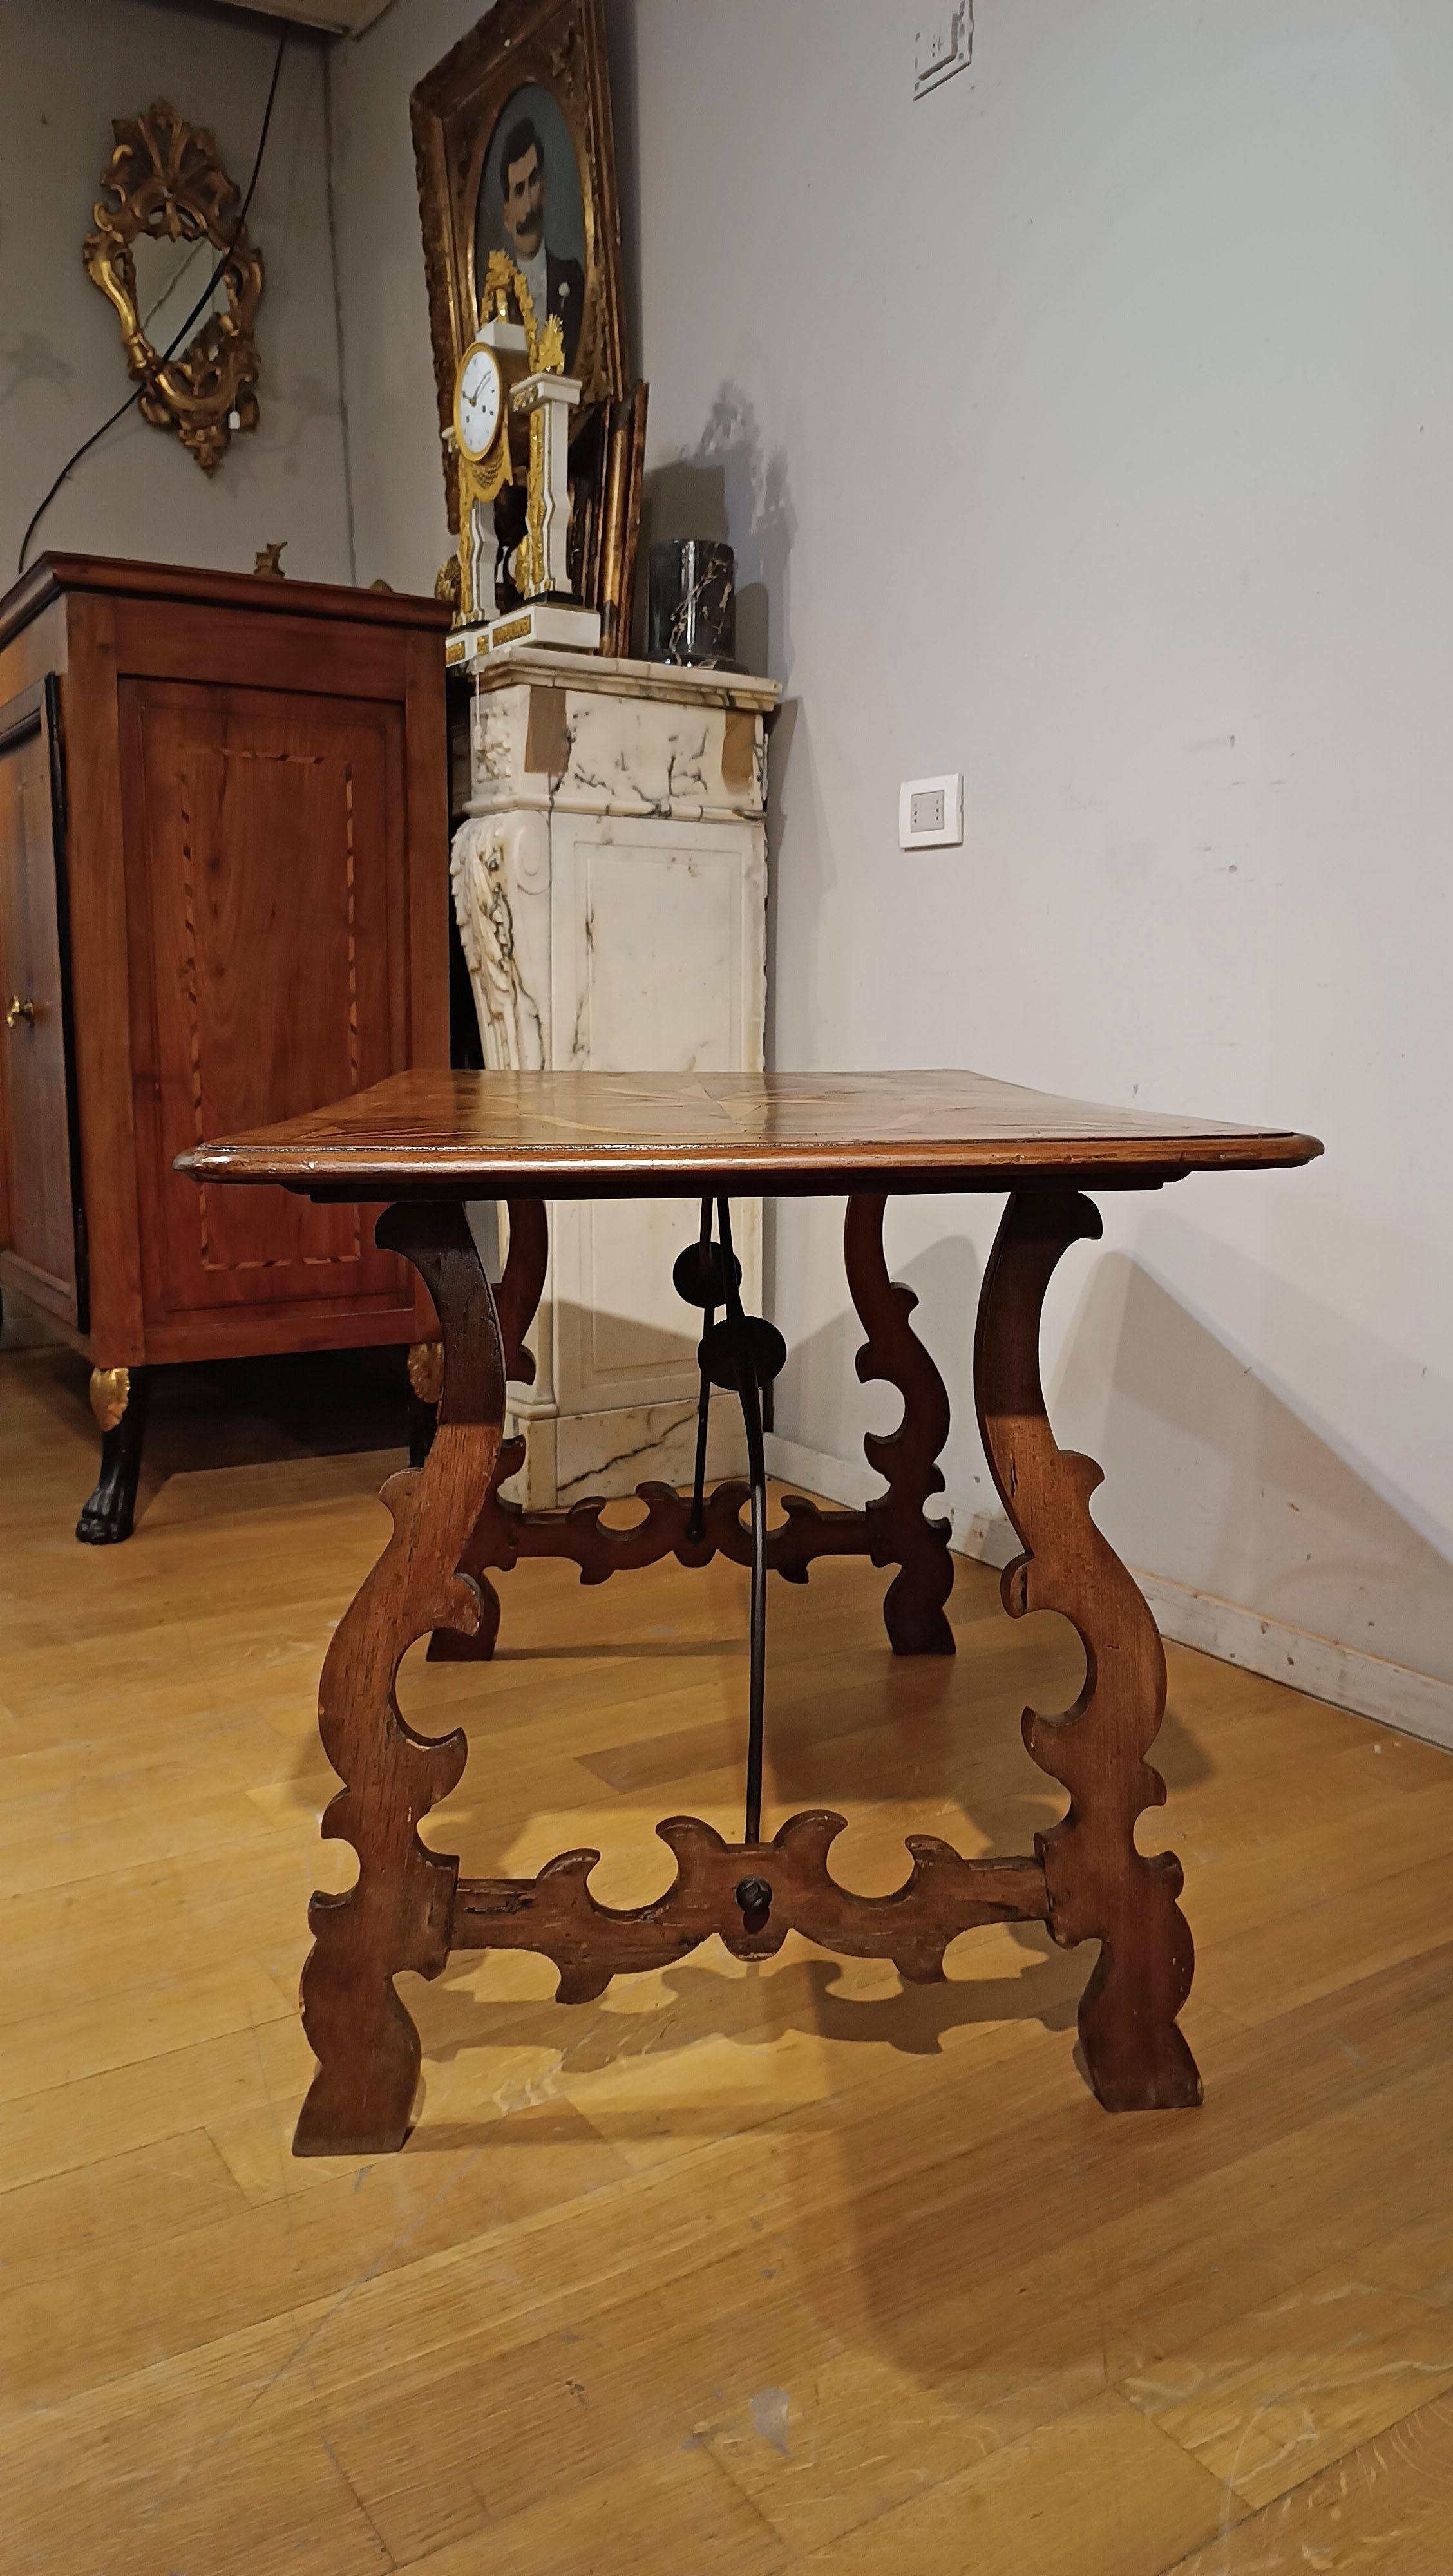 EARLY 18th CENTURY INLAID TABLE WITH LYRE LEGS In Good Condition For Sale In Firenze, FI